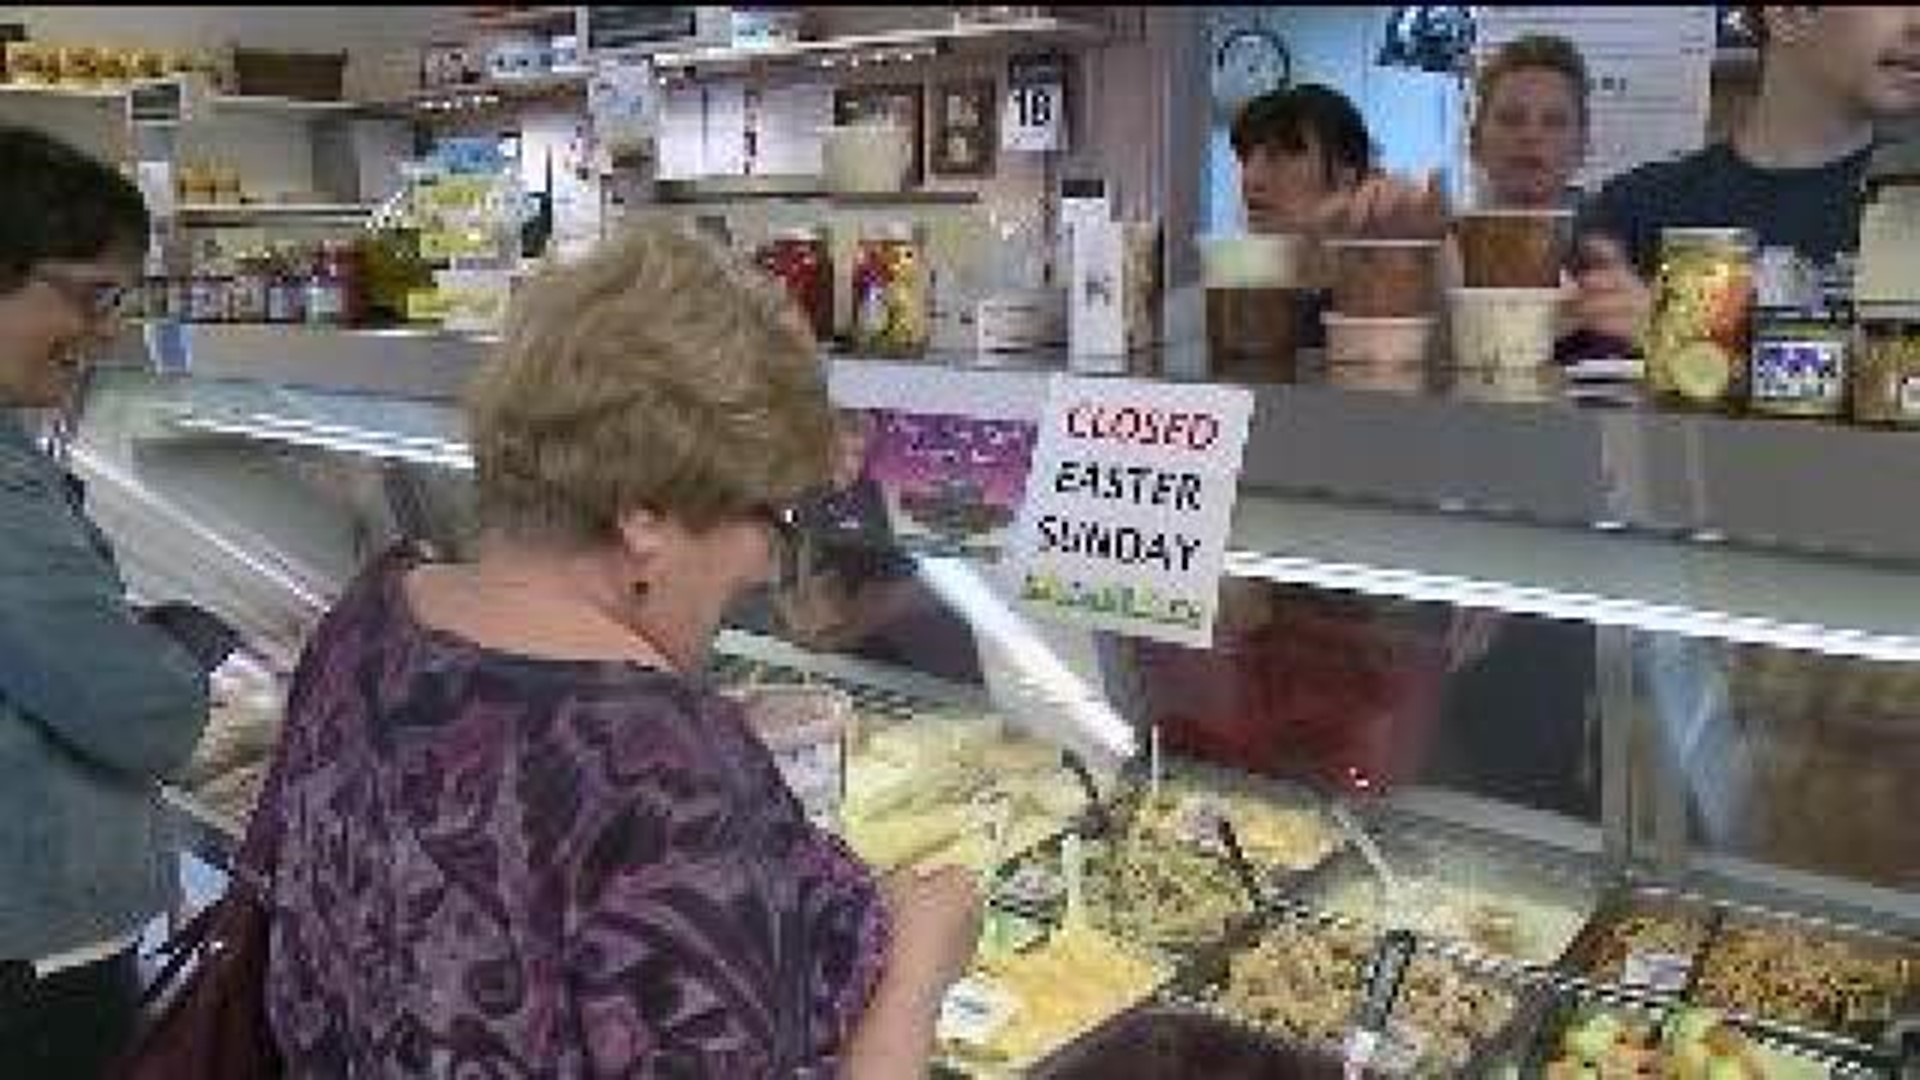 Deli in Williamsport Busy With Easter Shoppers